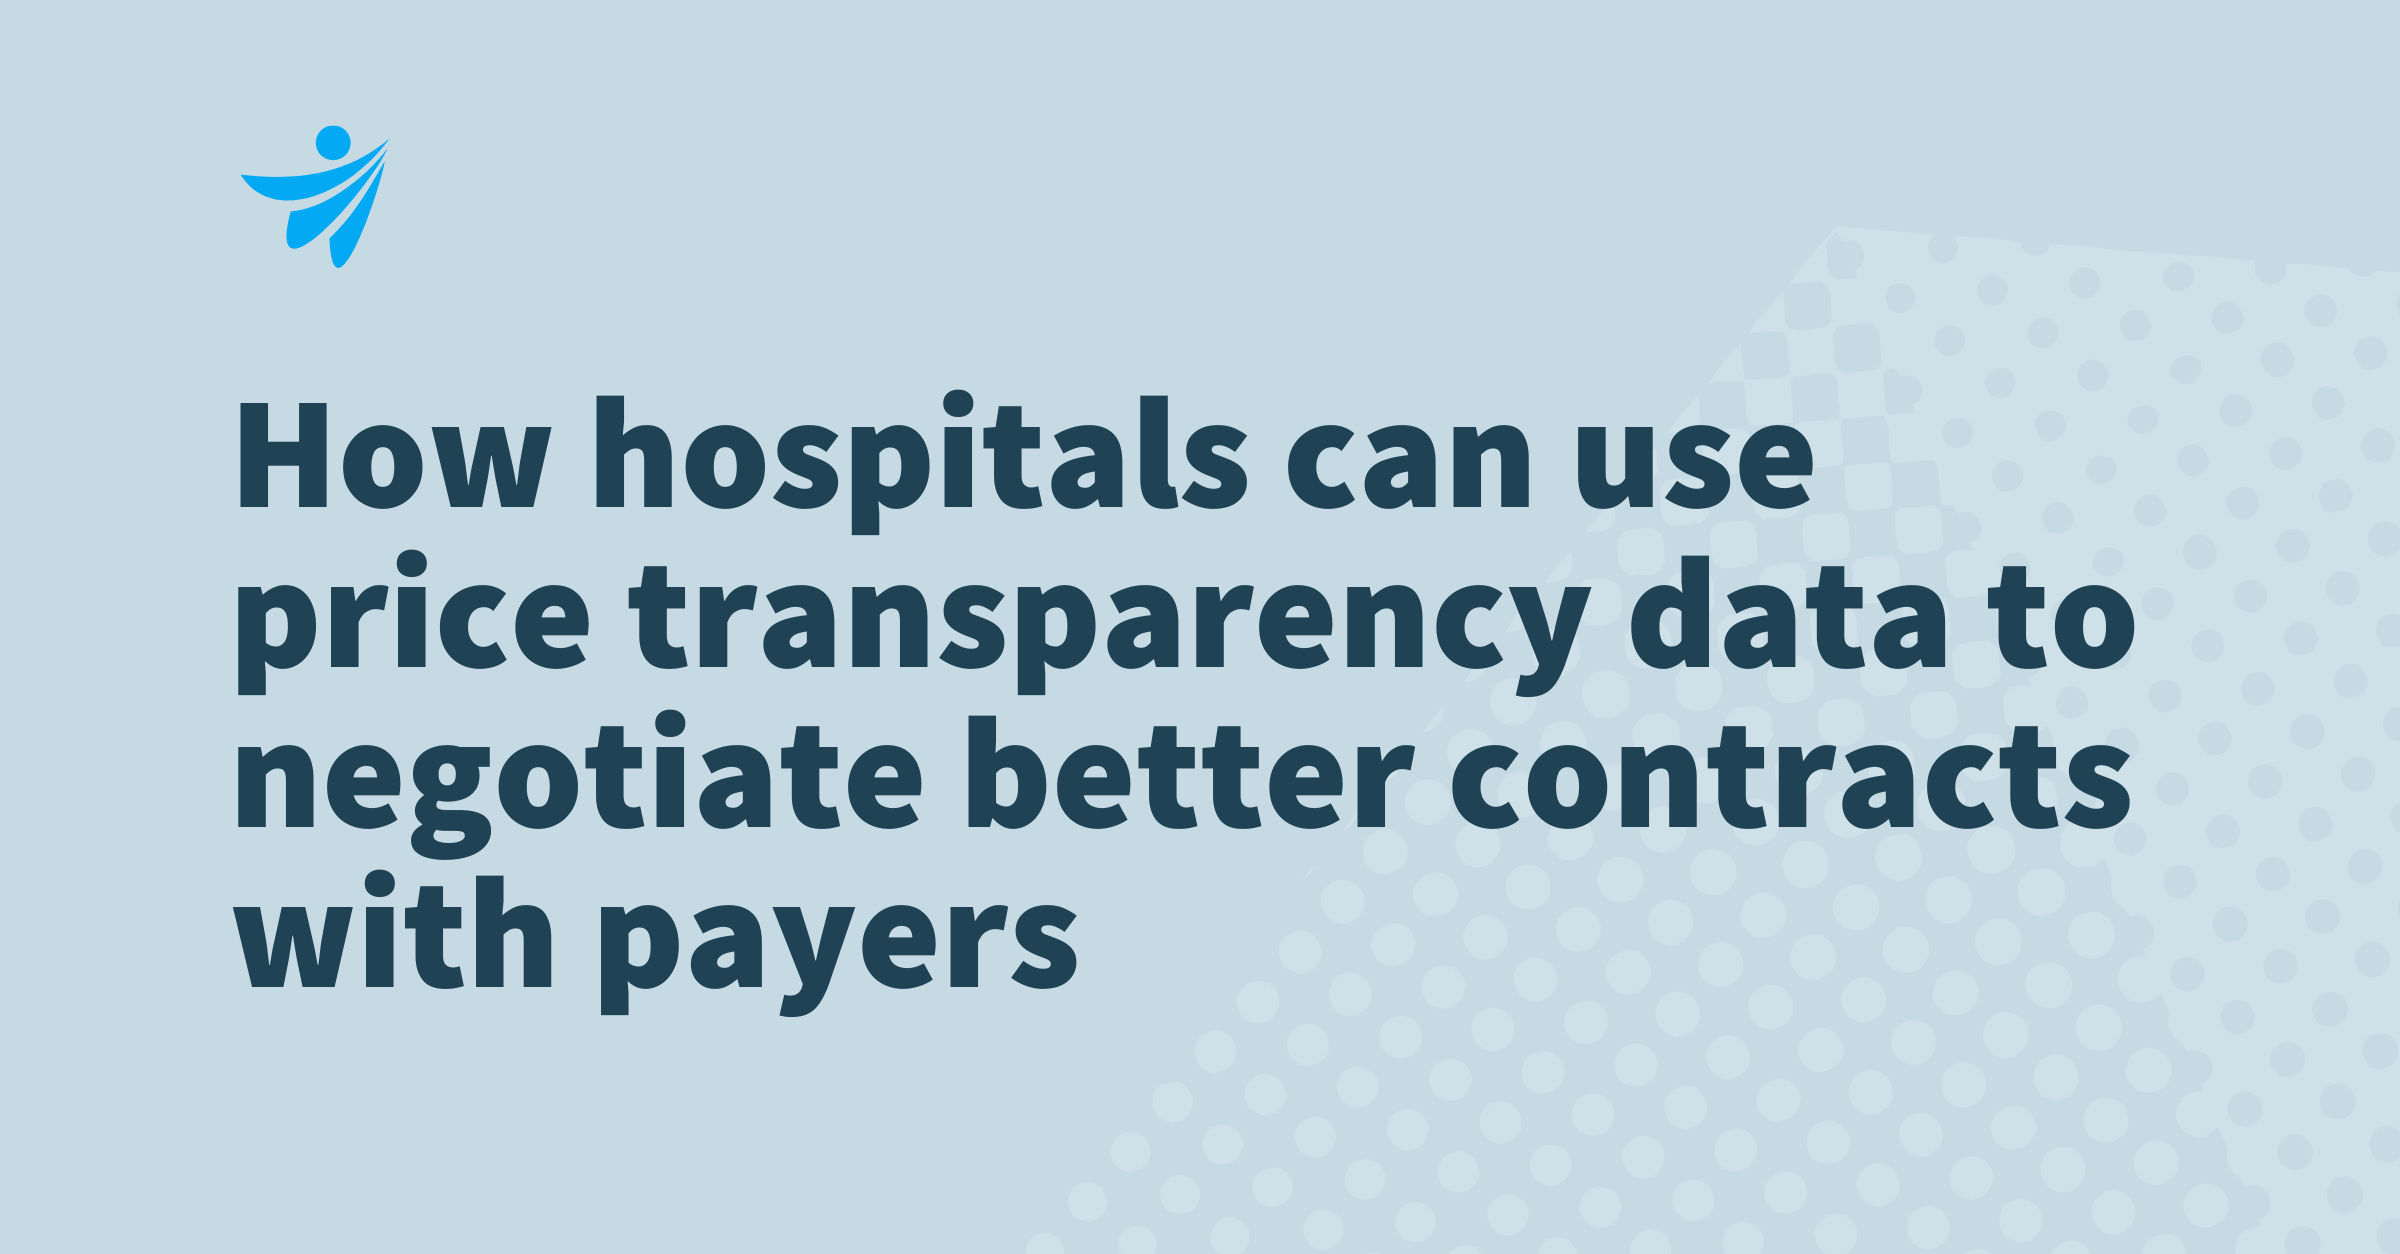 Thumbnail for How hospitals can use price transparency data to negotiate better contracts with payers